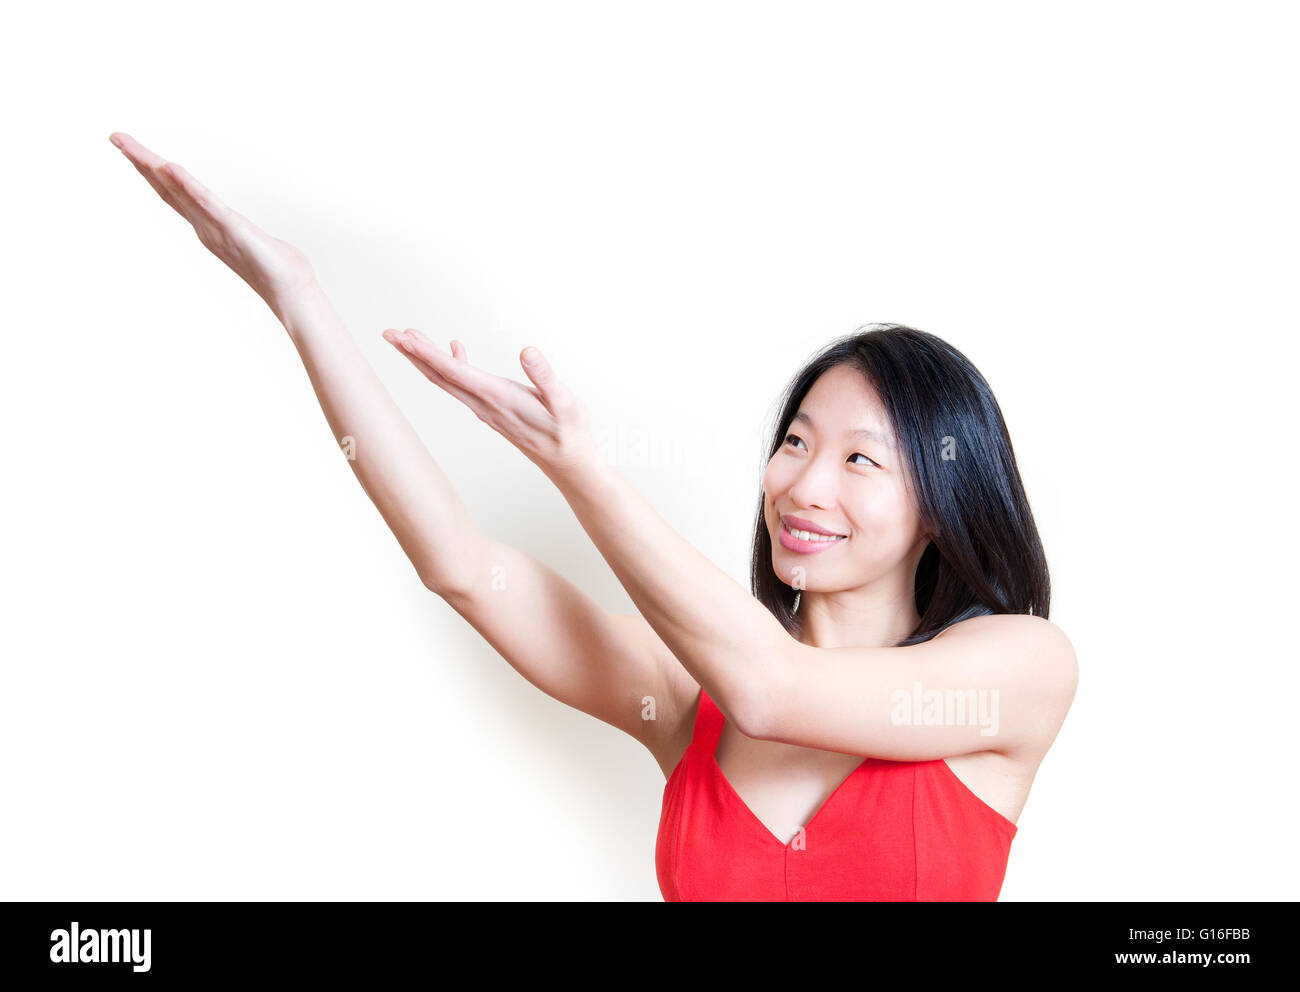 Young beautiful asian woman in red dress smiling and pointing out isolated on white background portrait Stock Photo